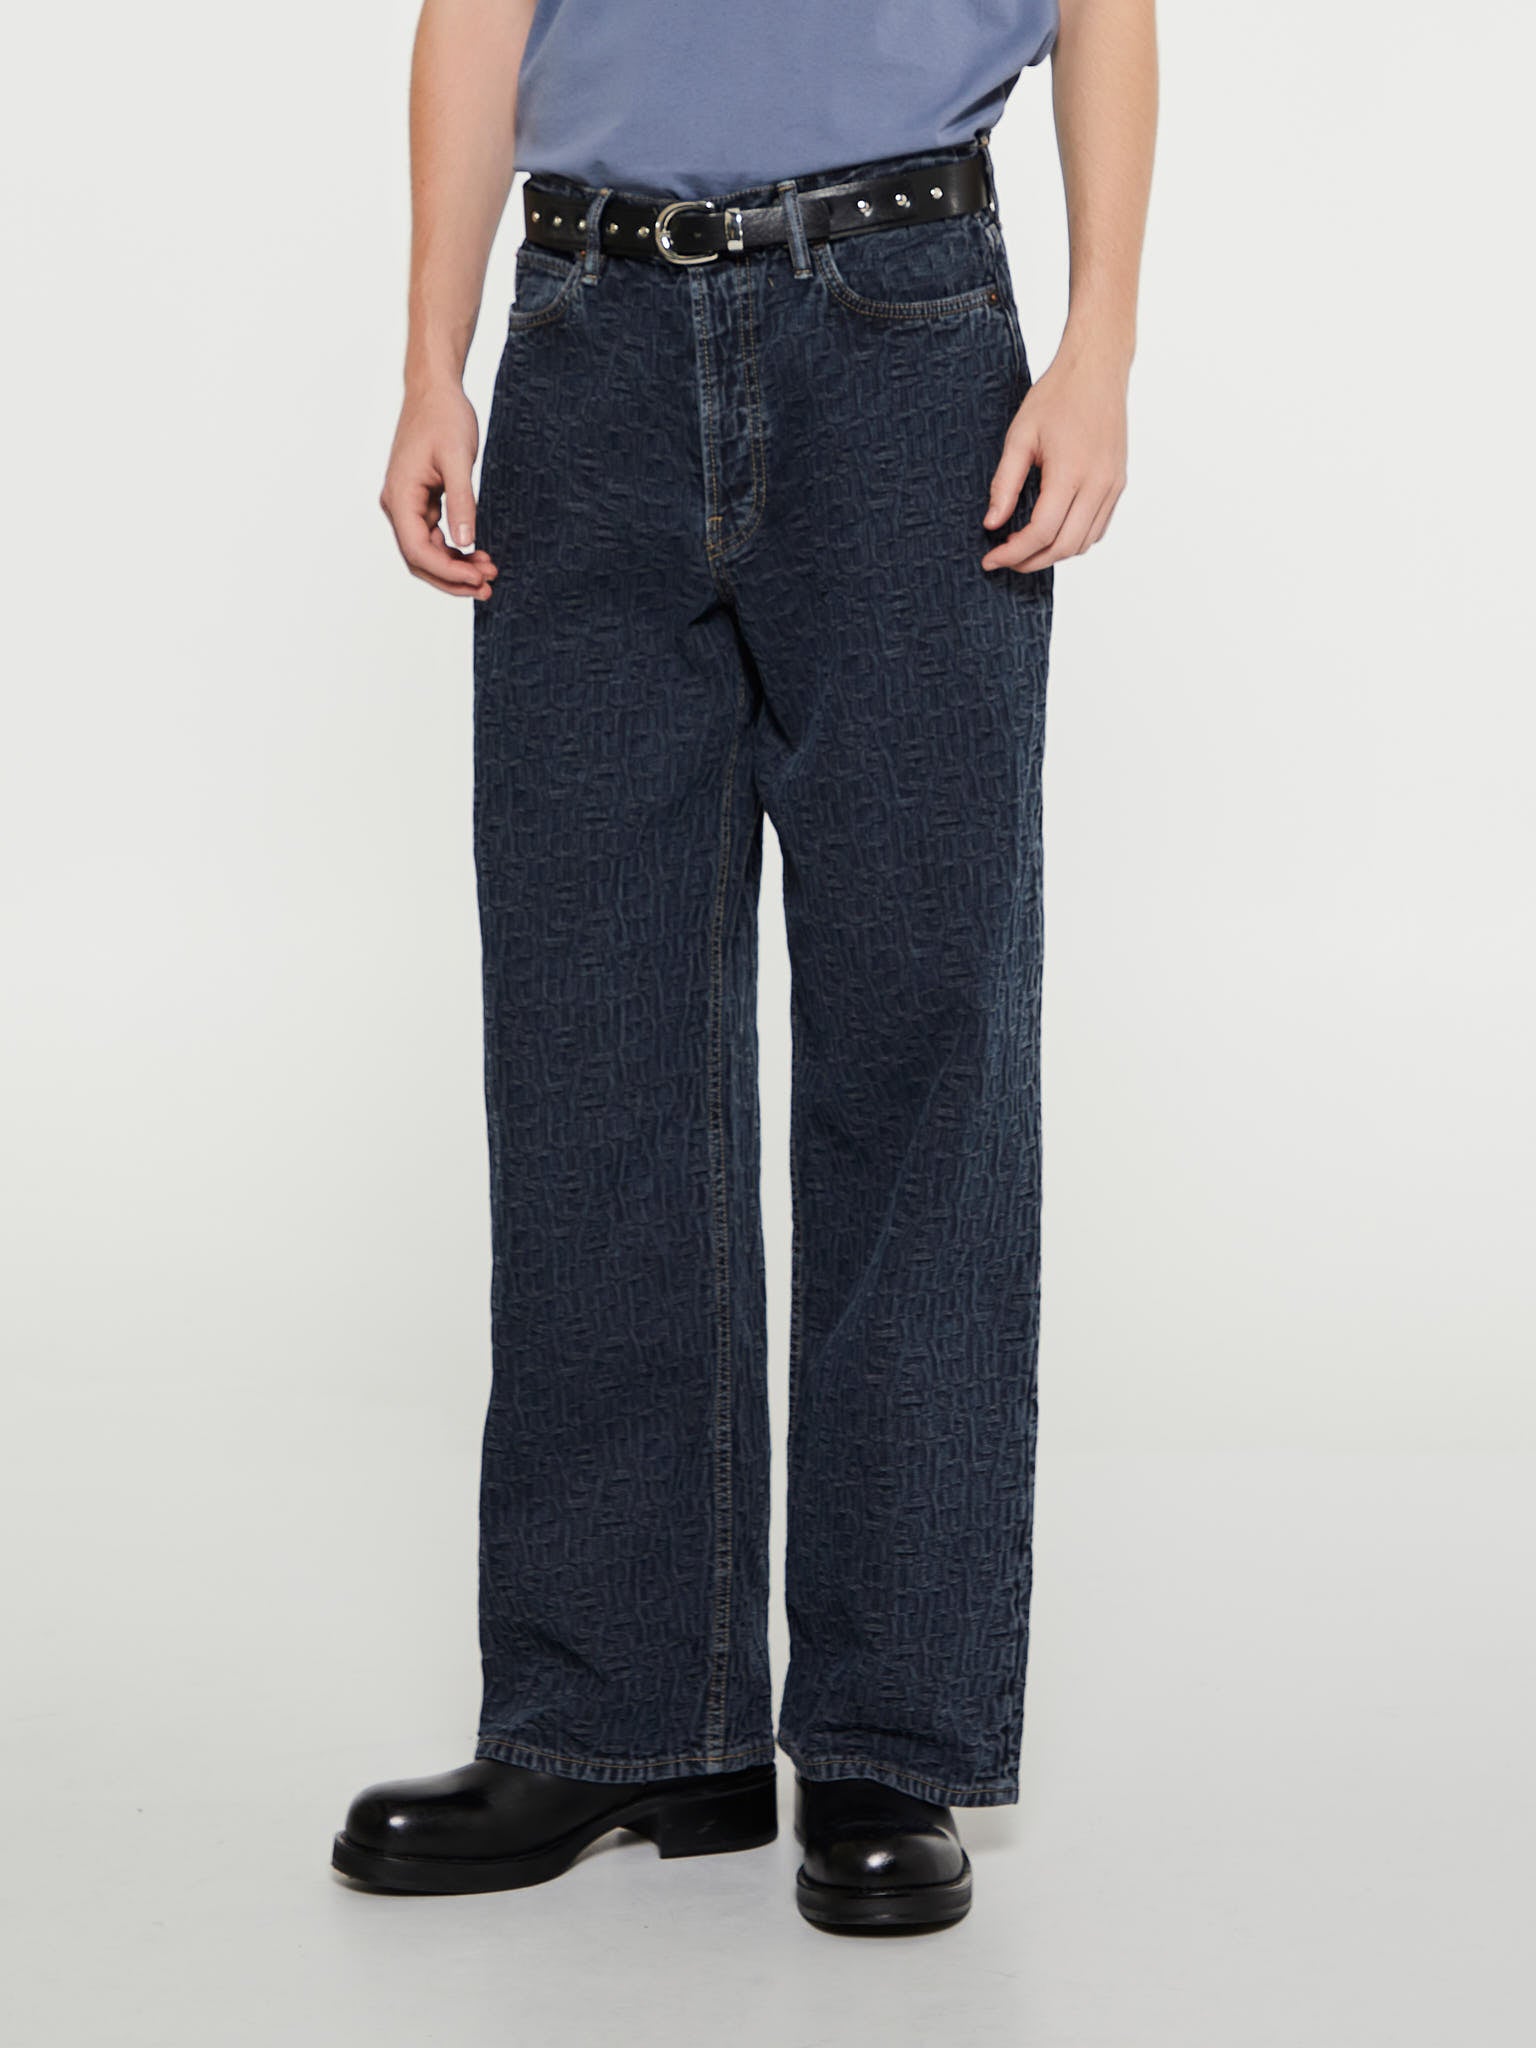 1981M Baggy Fit Monogram Jeans in Blue and Black